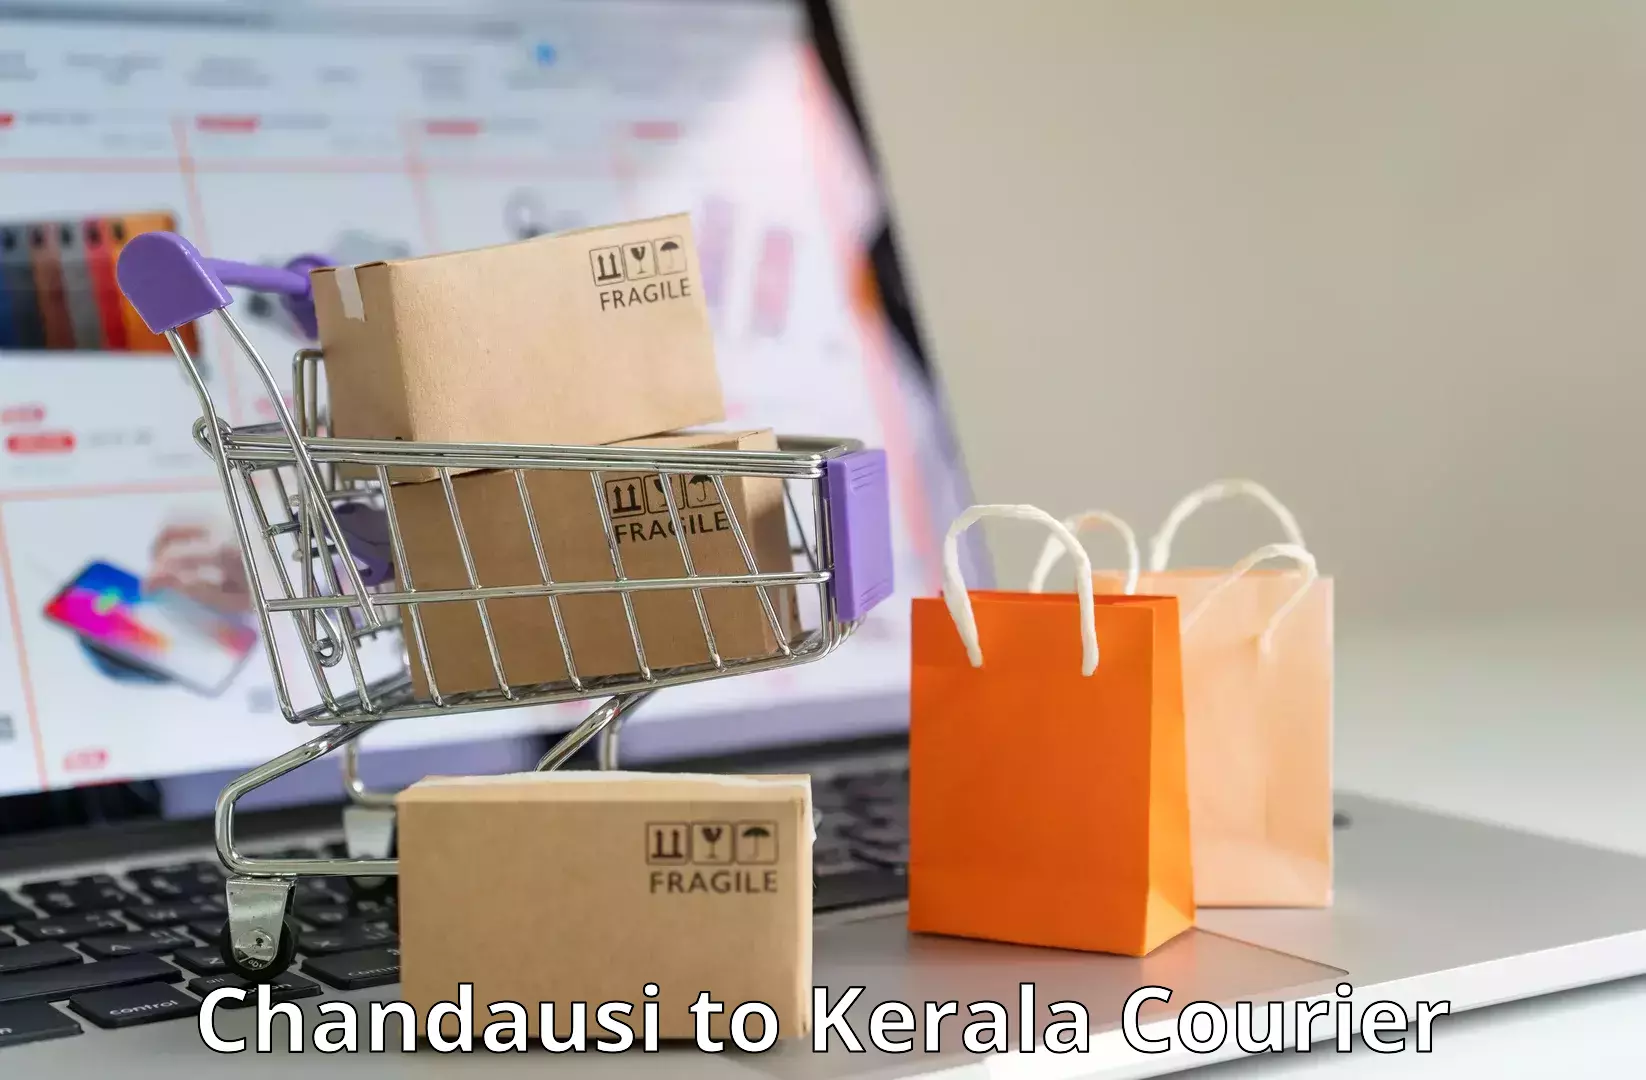 Express delivery network Chandausi to Kothanalloor